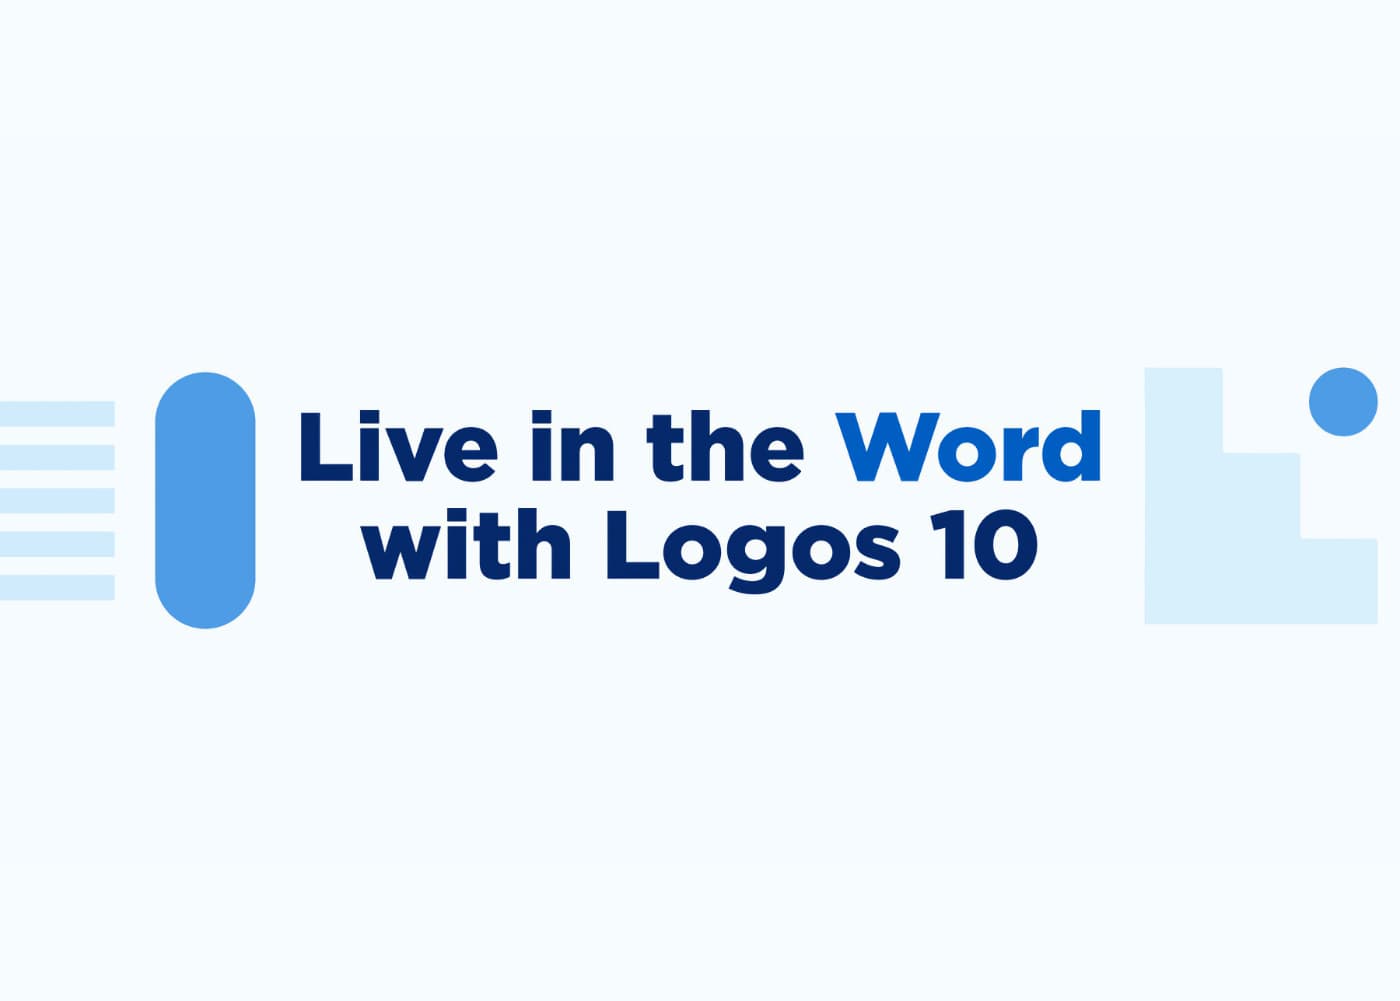 Logos, the most widely used Bible study and sermon preparation platform available, released its highly anticipated new version, Logos 10